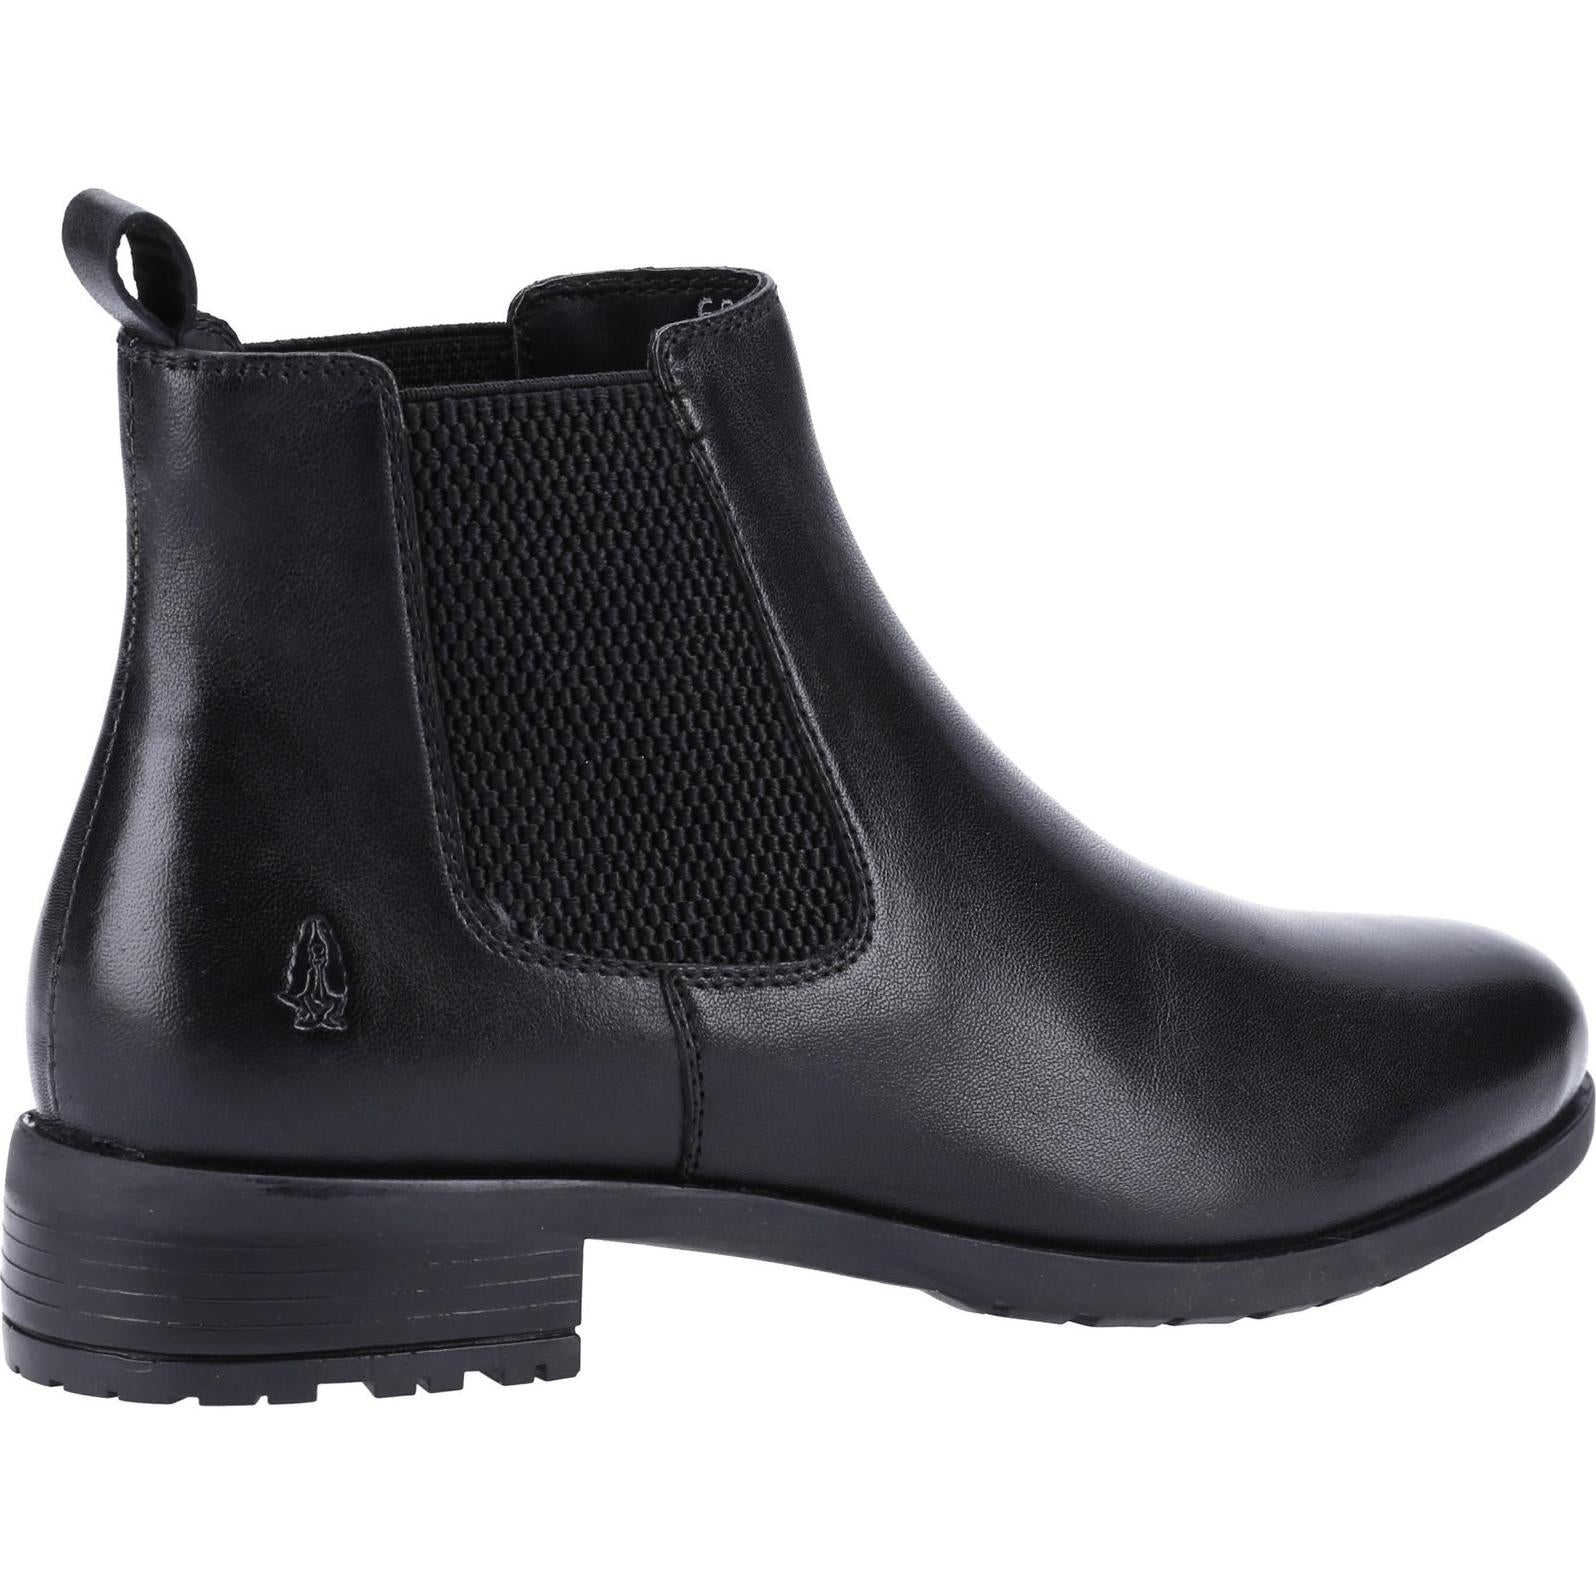 Hush Puppies Sammie Ankle Boot